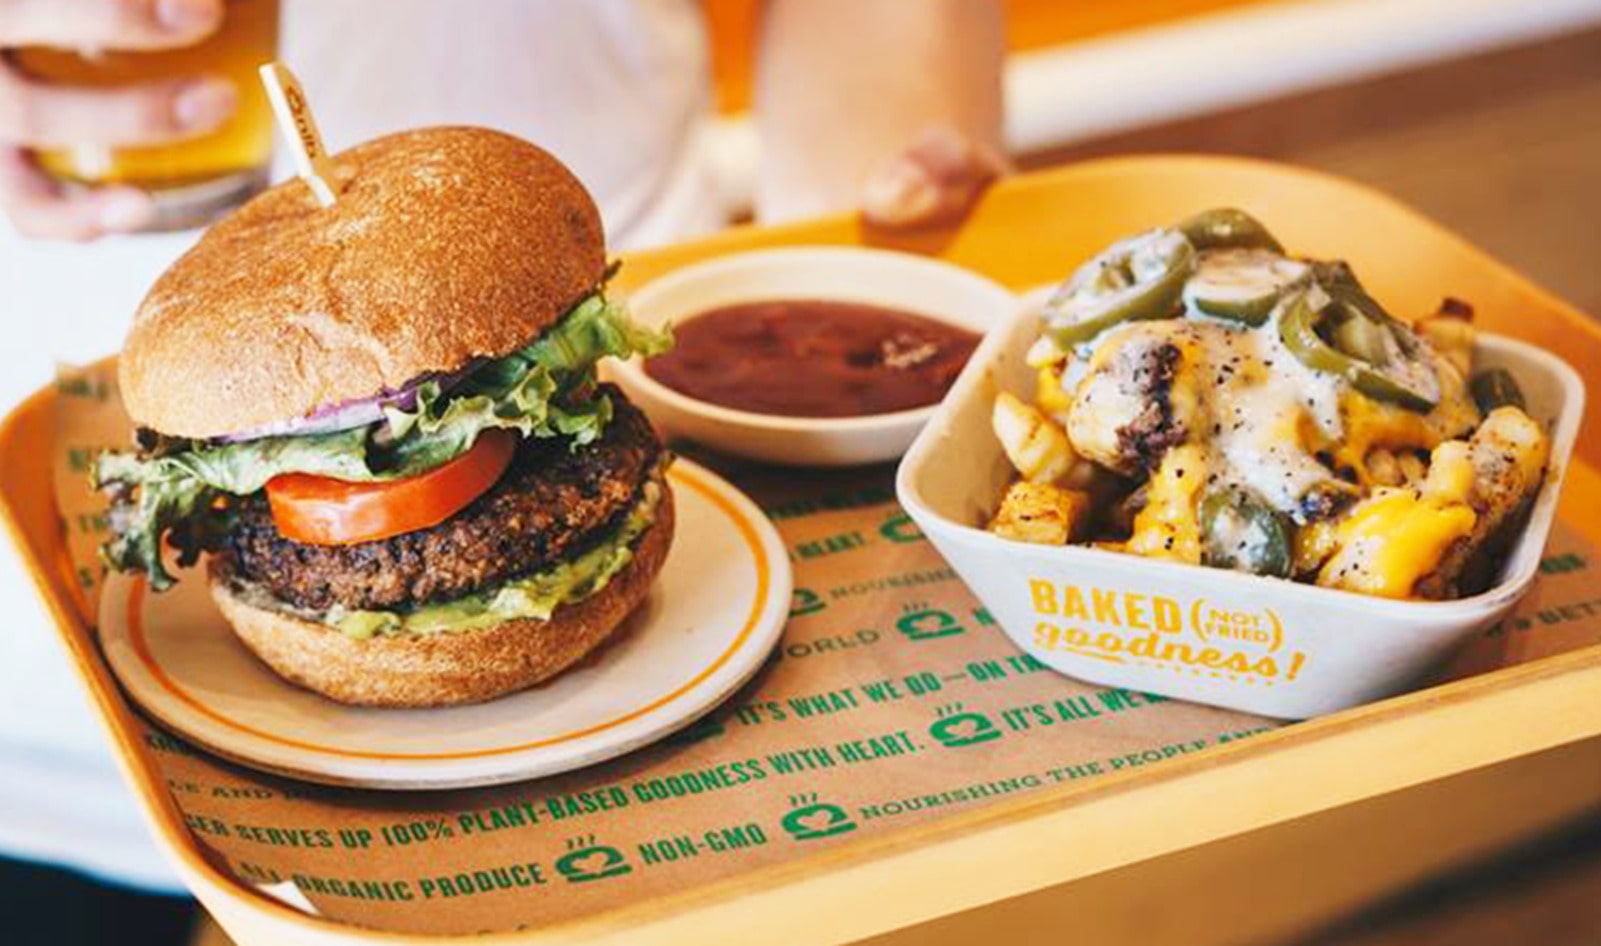 Vegan Chain Next Level Burger Raises $5,000 to “Feed the Fearless” During COVID-19